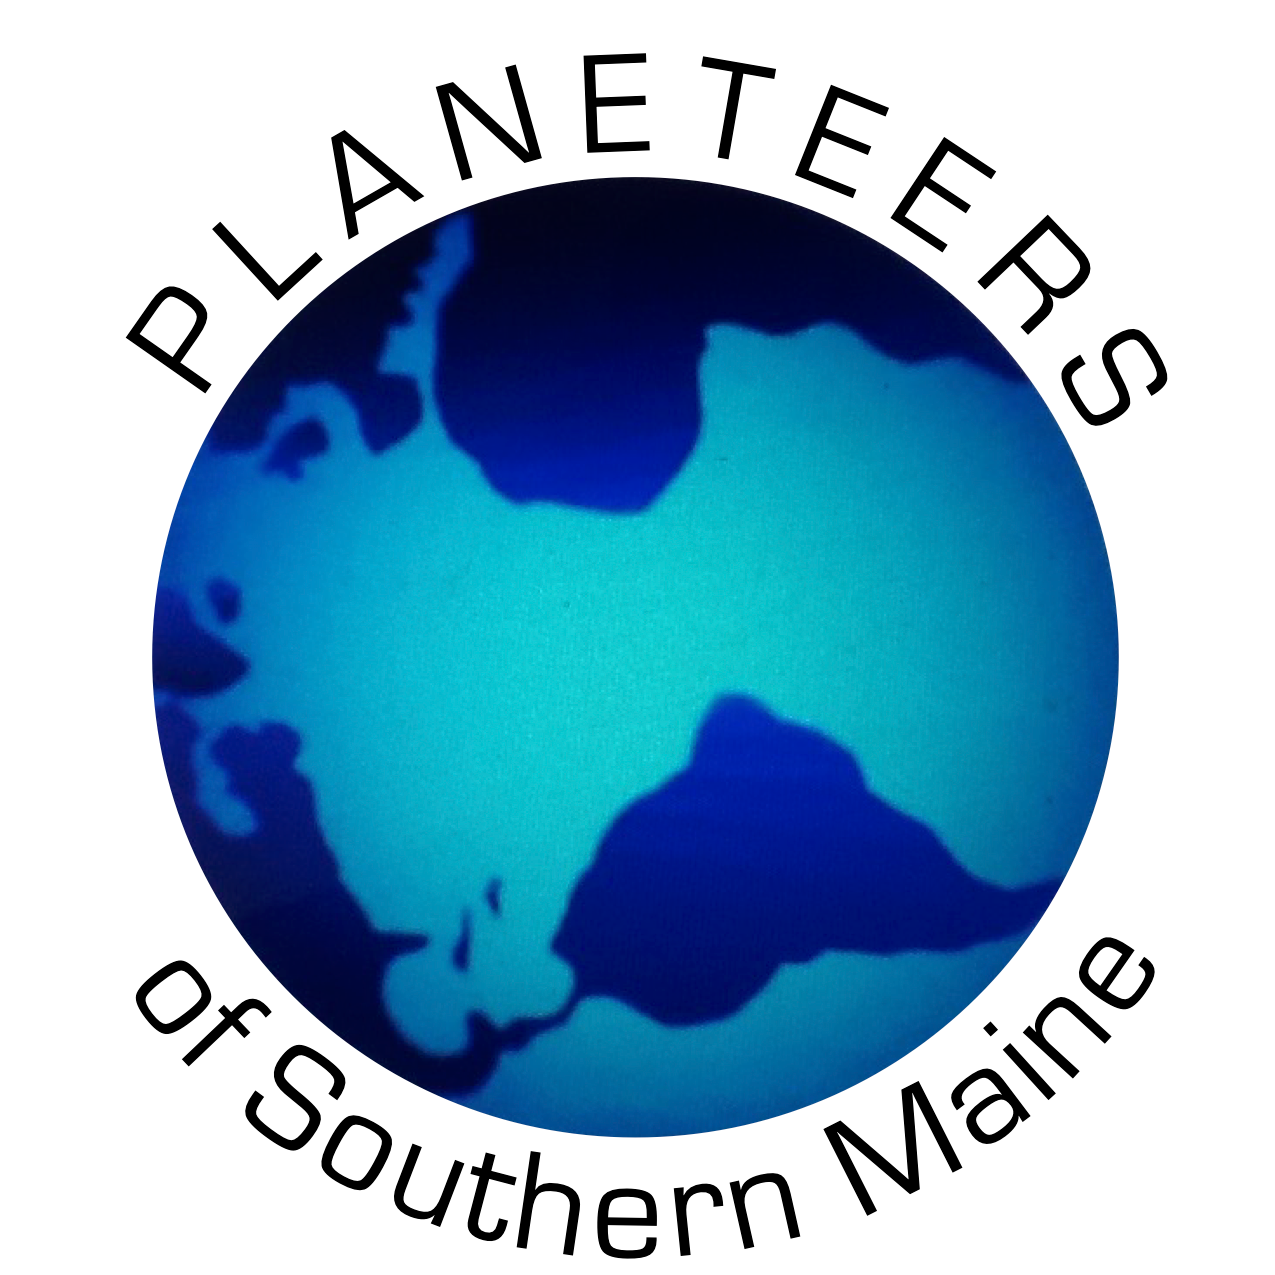 Planeteers of Southern Maine